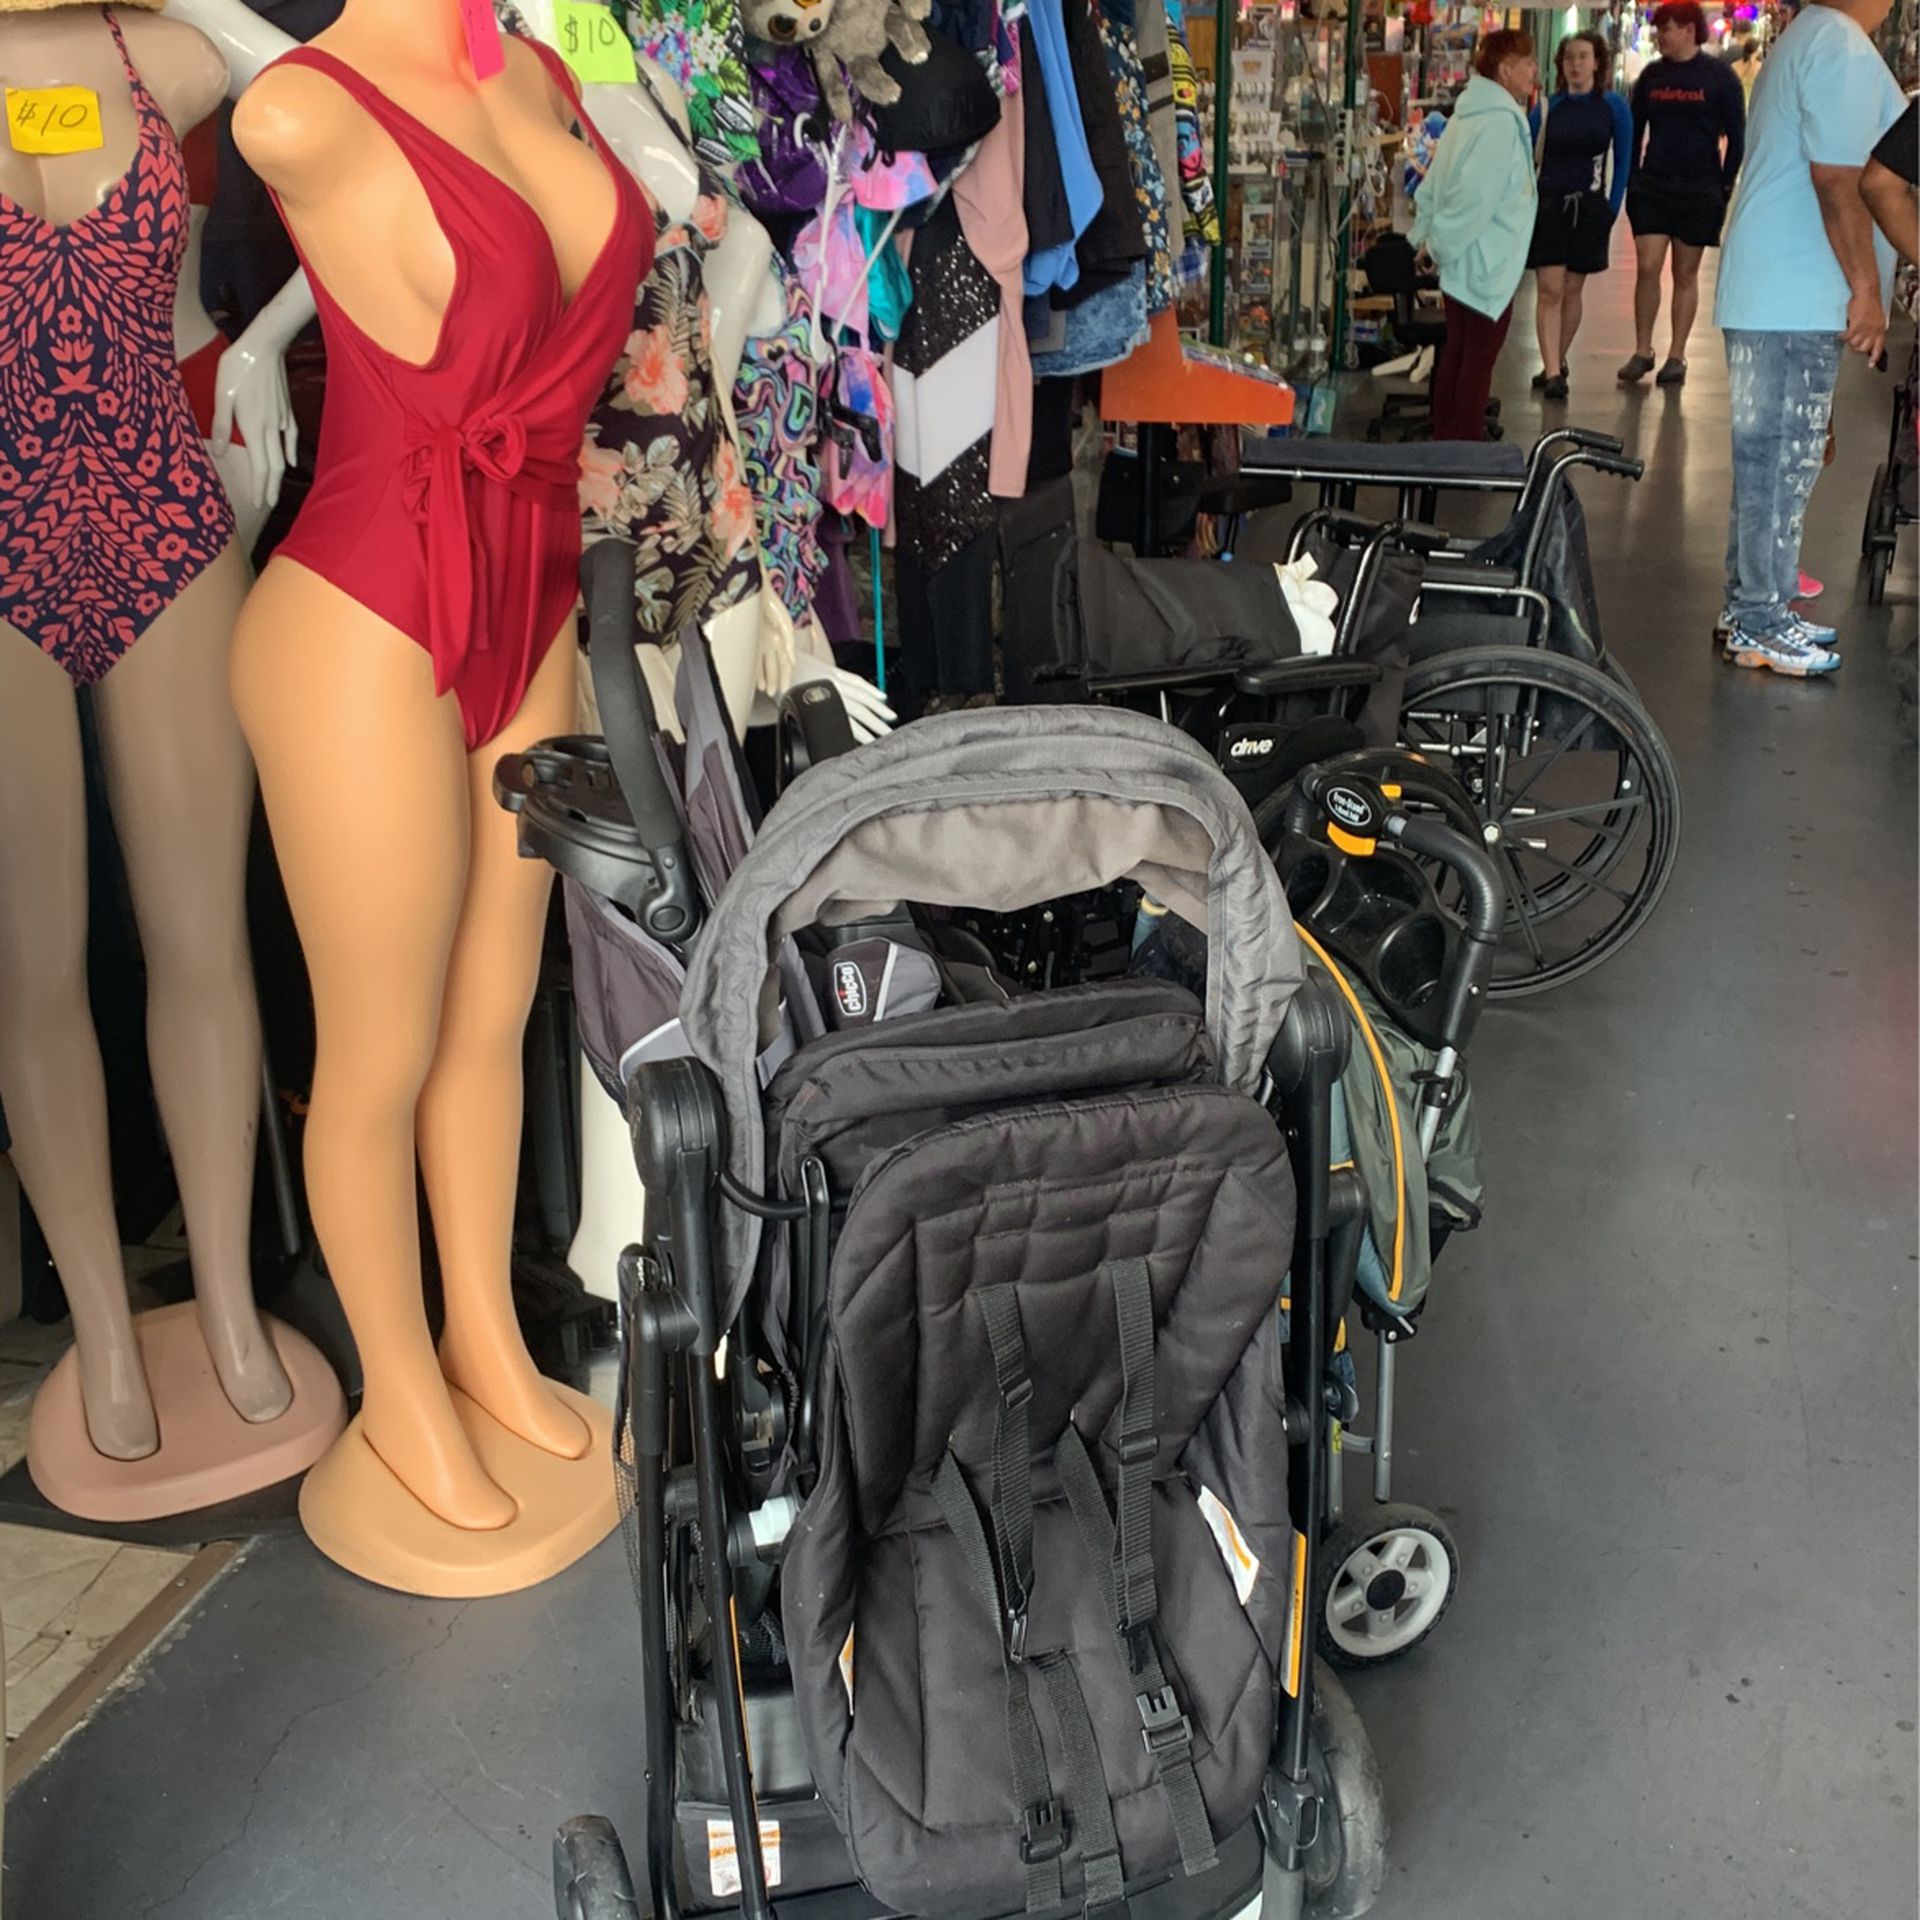 Wheel Chair, Stroller And More